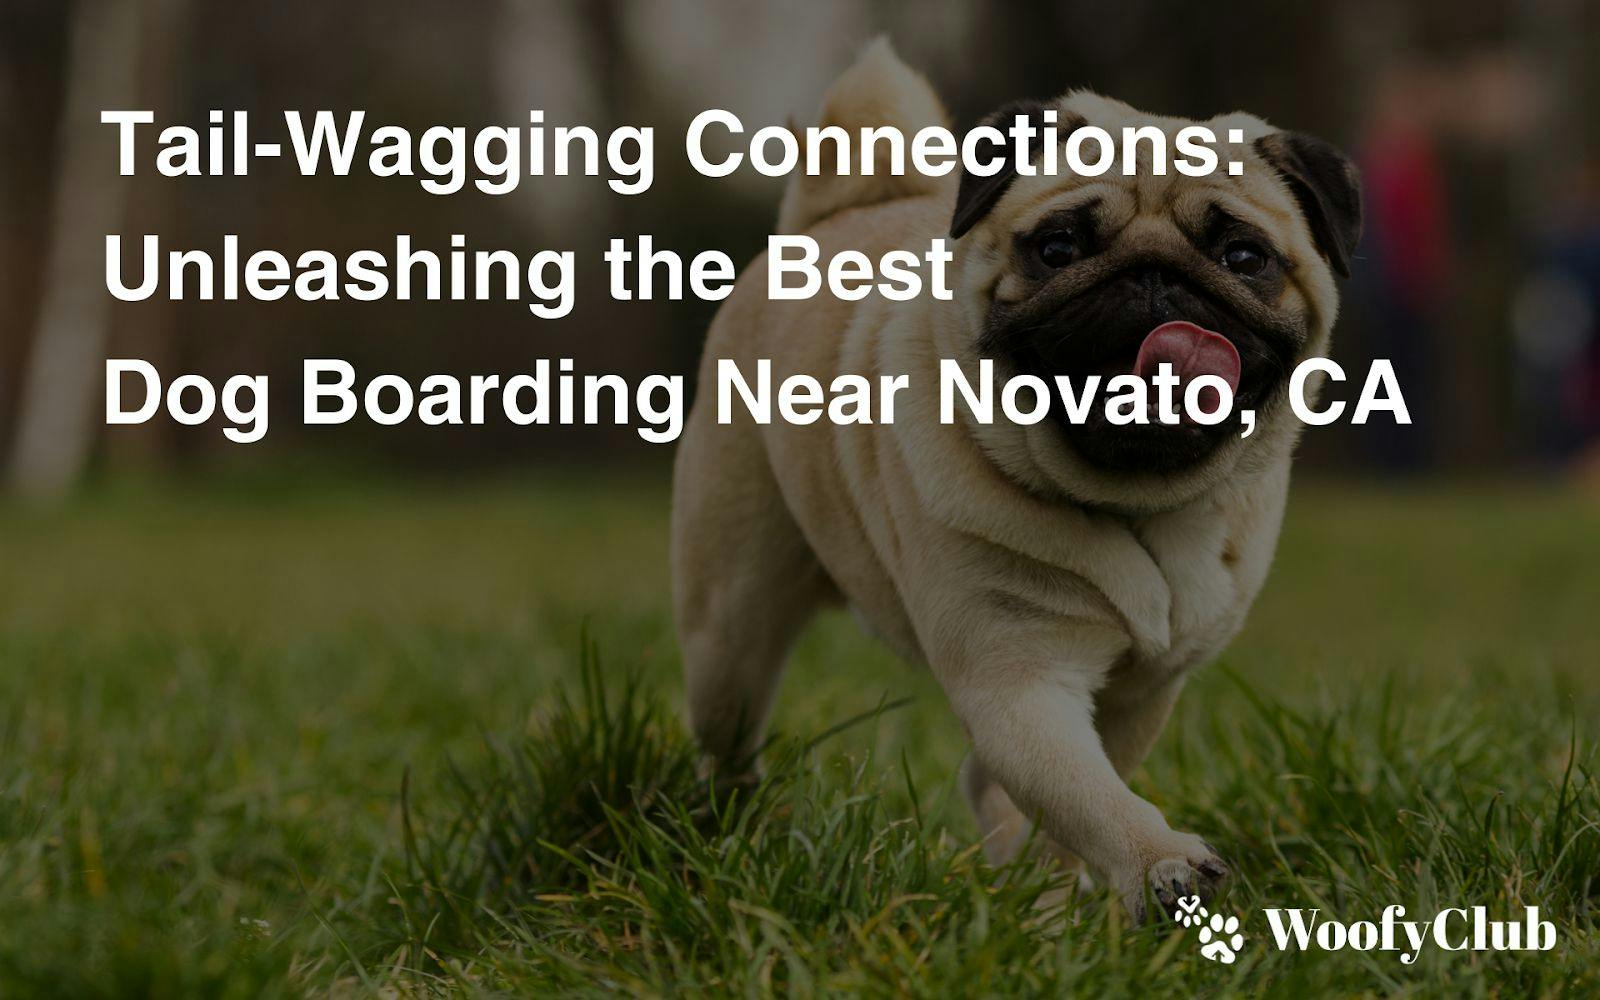 Tail-Wagging Connections: Unleashing The Best Dog Boarding Near Novato, CA